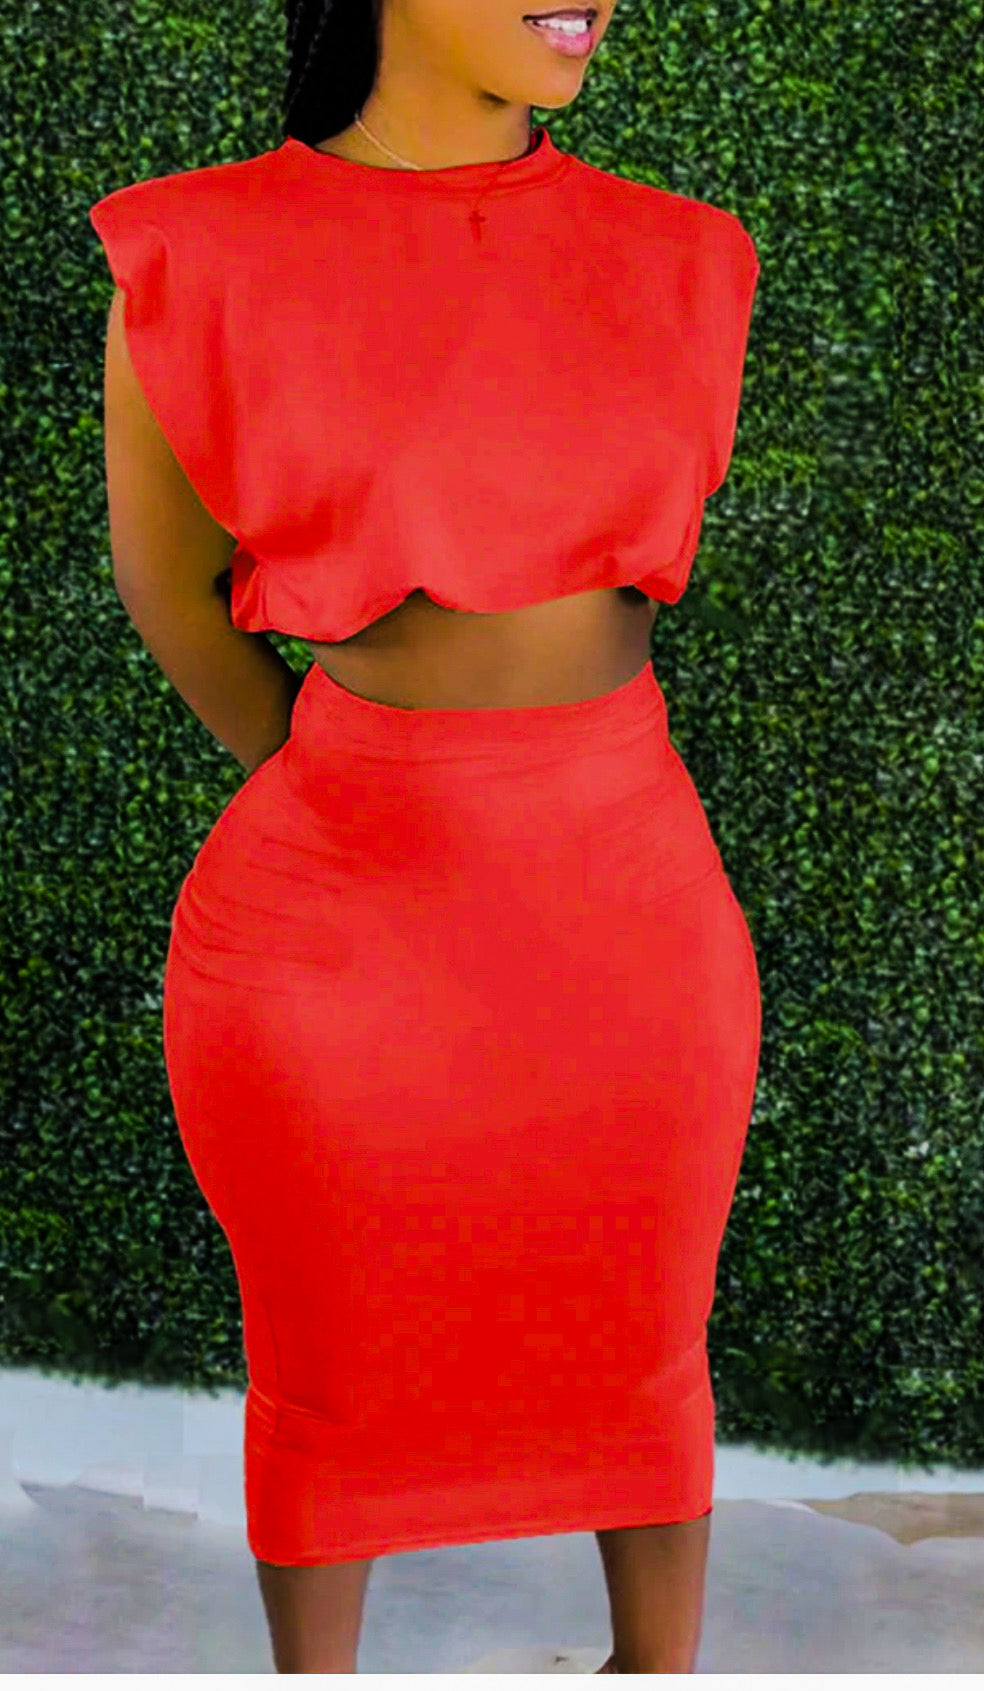 “Just Cooling” Skirt Set in color: Red